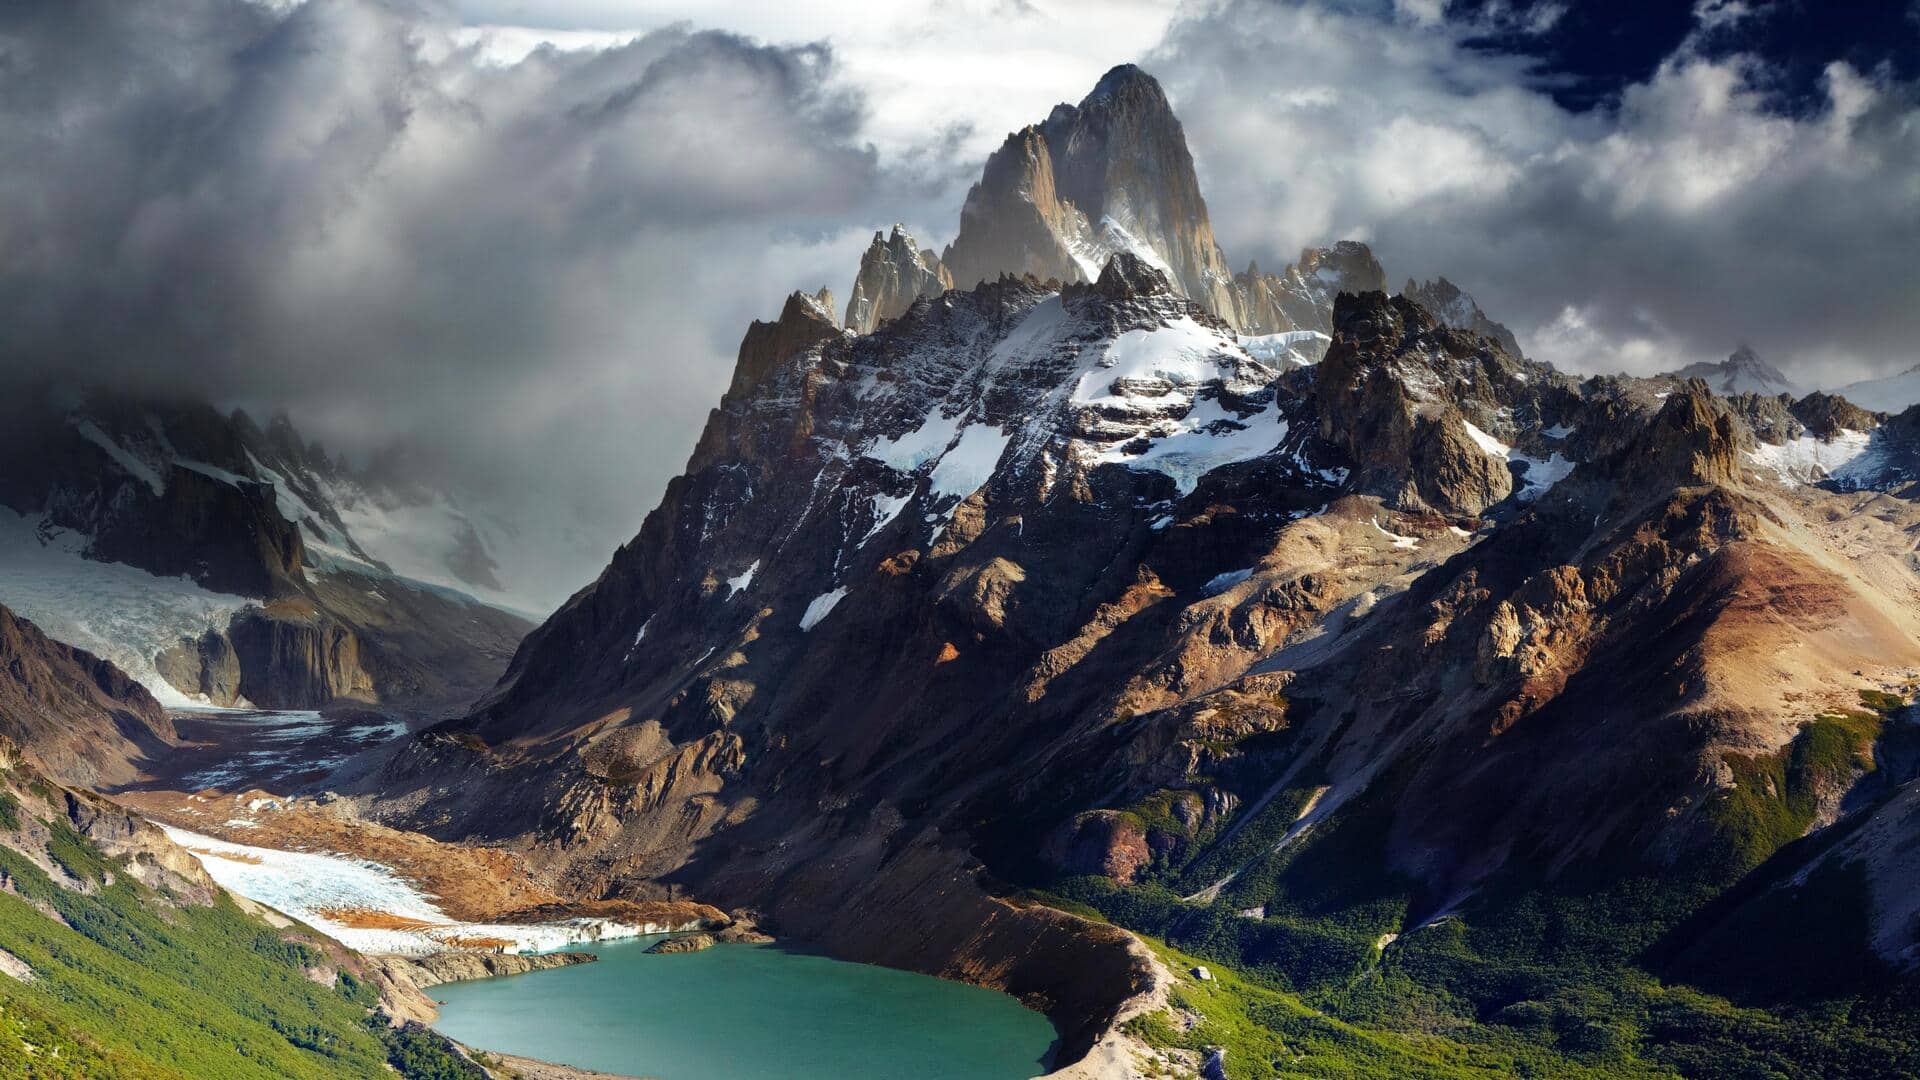 Interesting things to do in Patagonia, Argentina